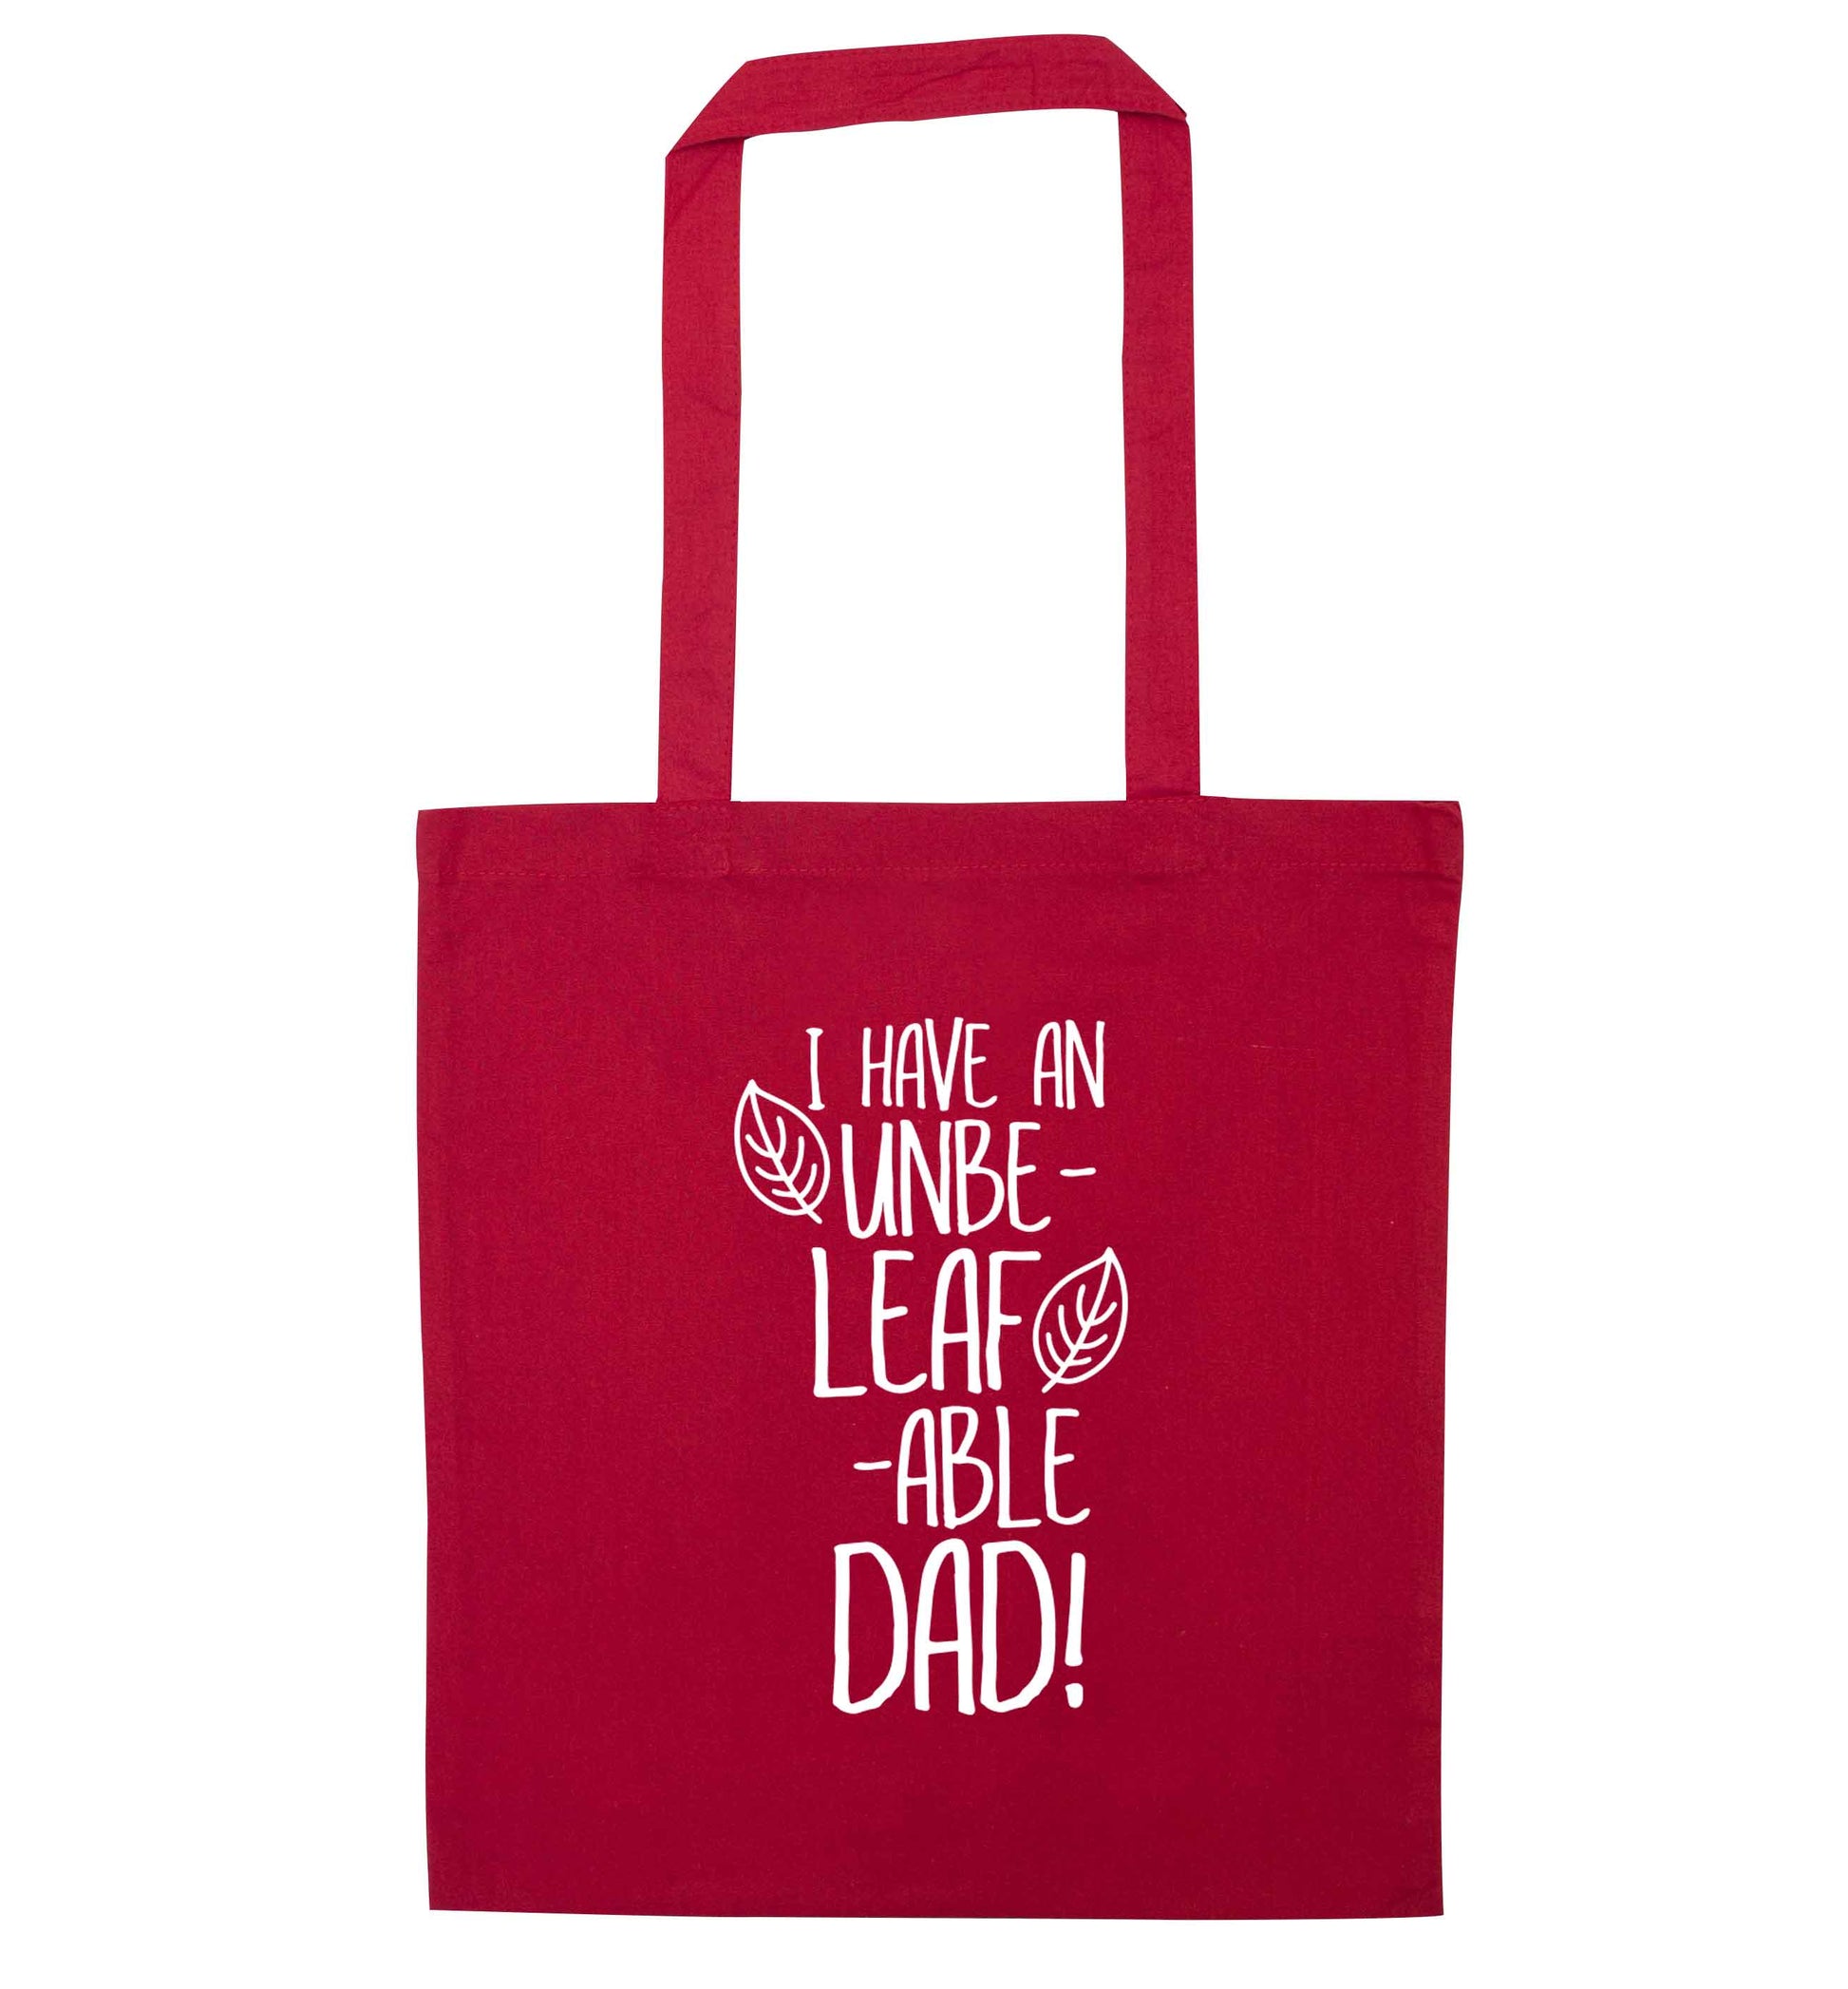 I have an unbe-leaf-able dad red tote bag